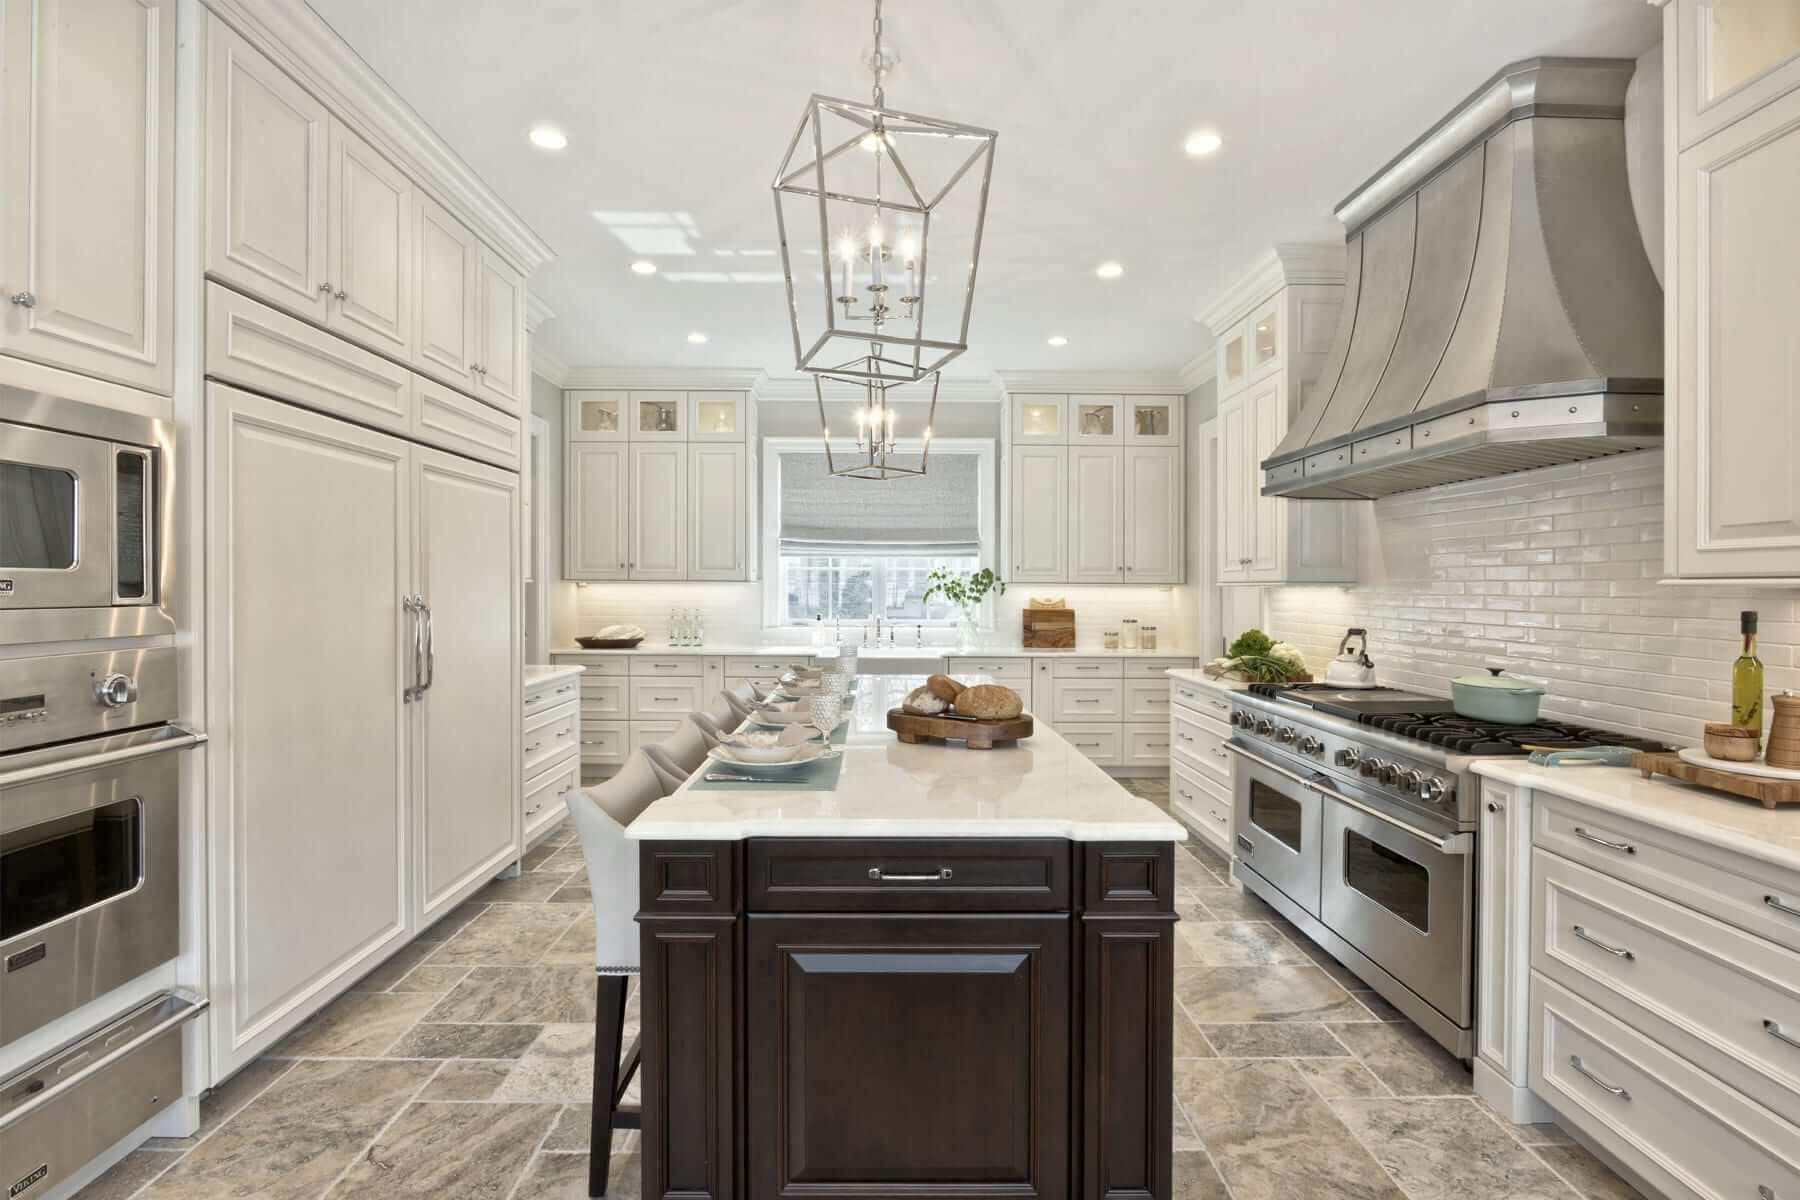 Classic kitchen features large cherry stained Bilotta island topped with Biano Rhino marble.